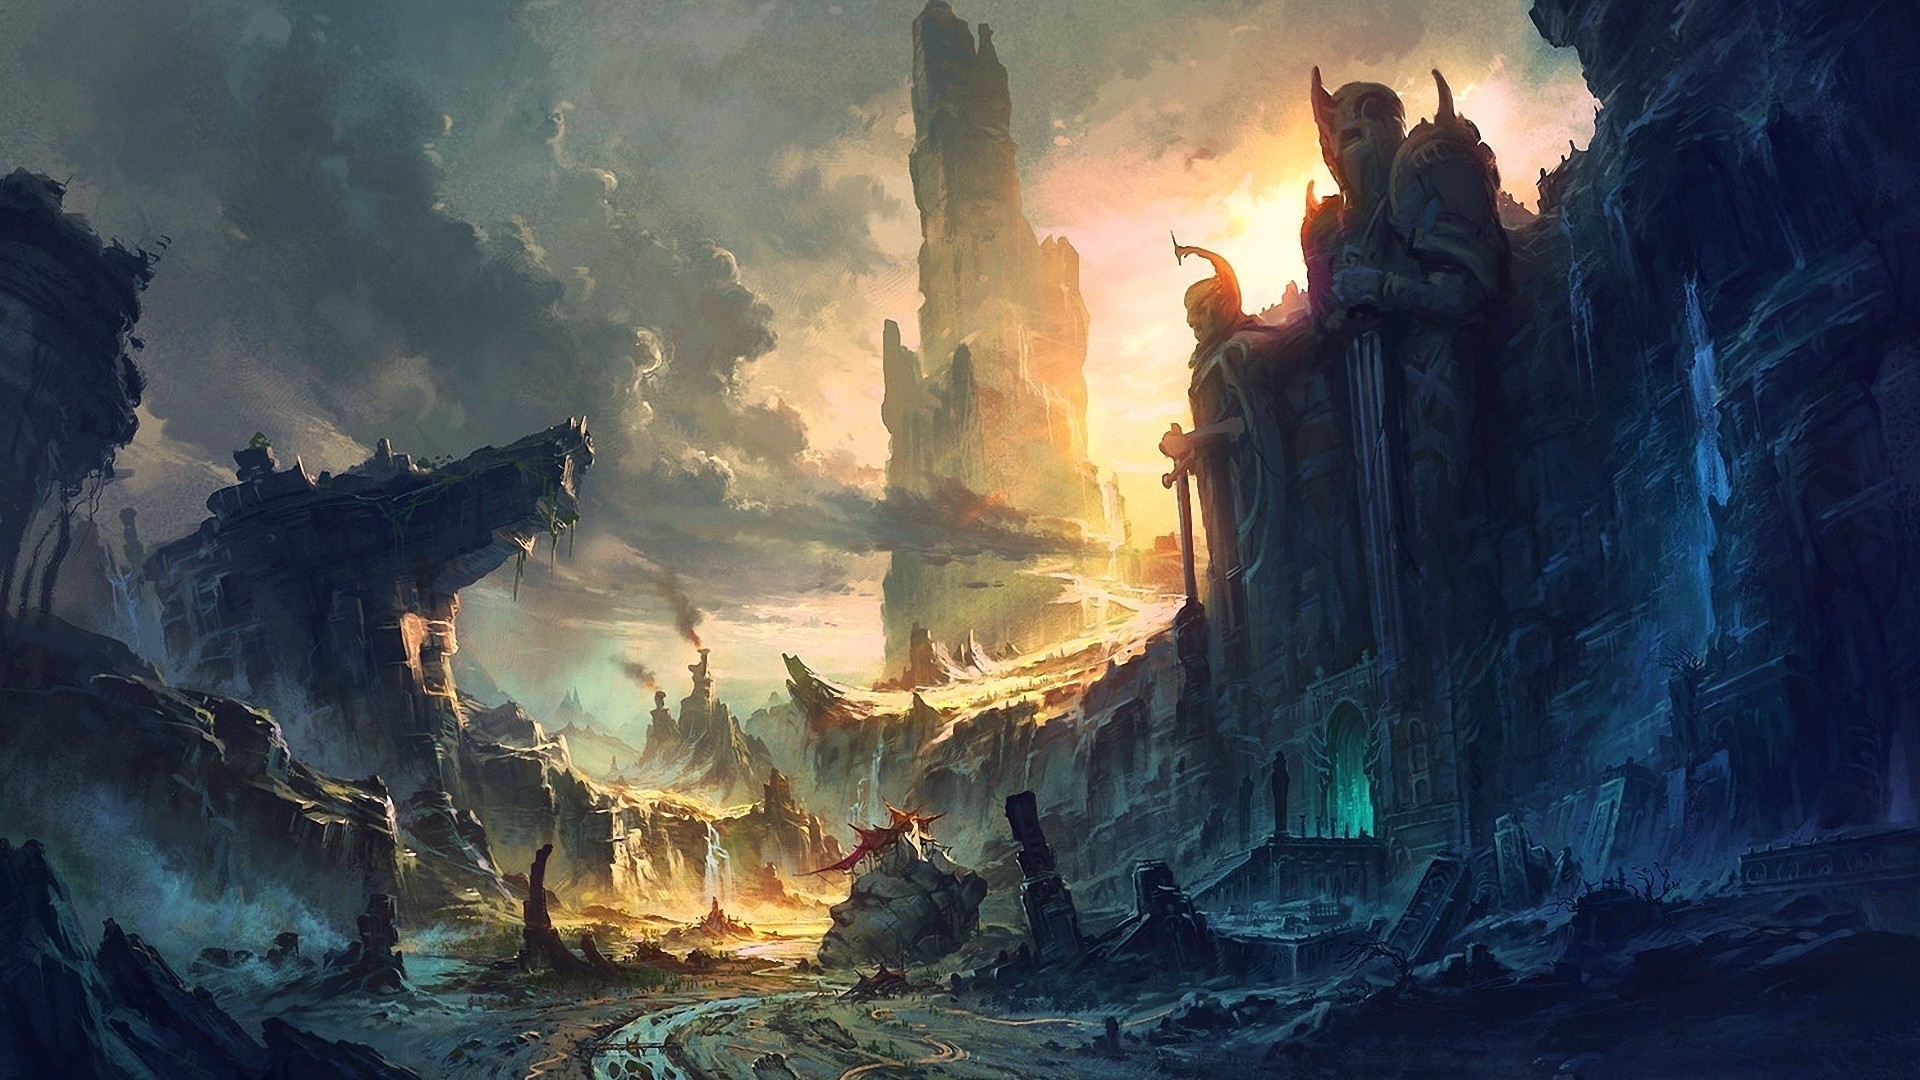 1920x1080 Lord of rings artwork castles concept art wallpaper. Fresh HD wallpapers  for your desktop.